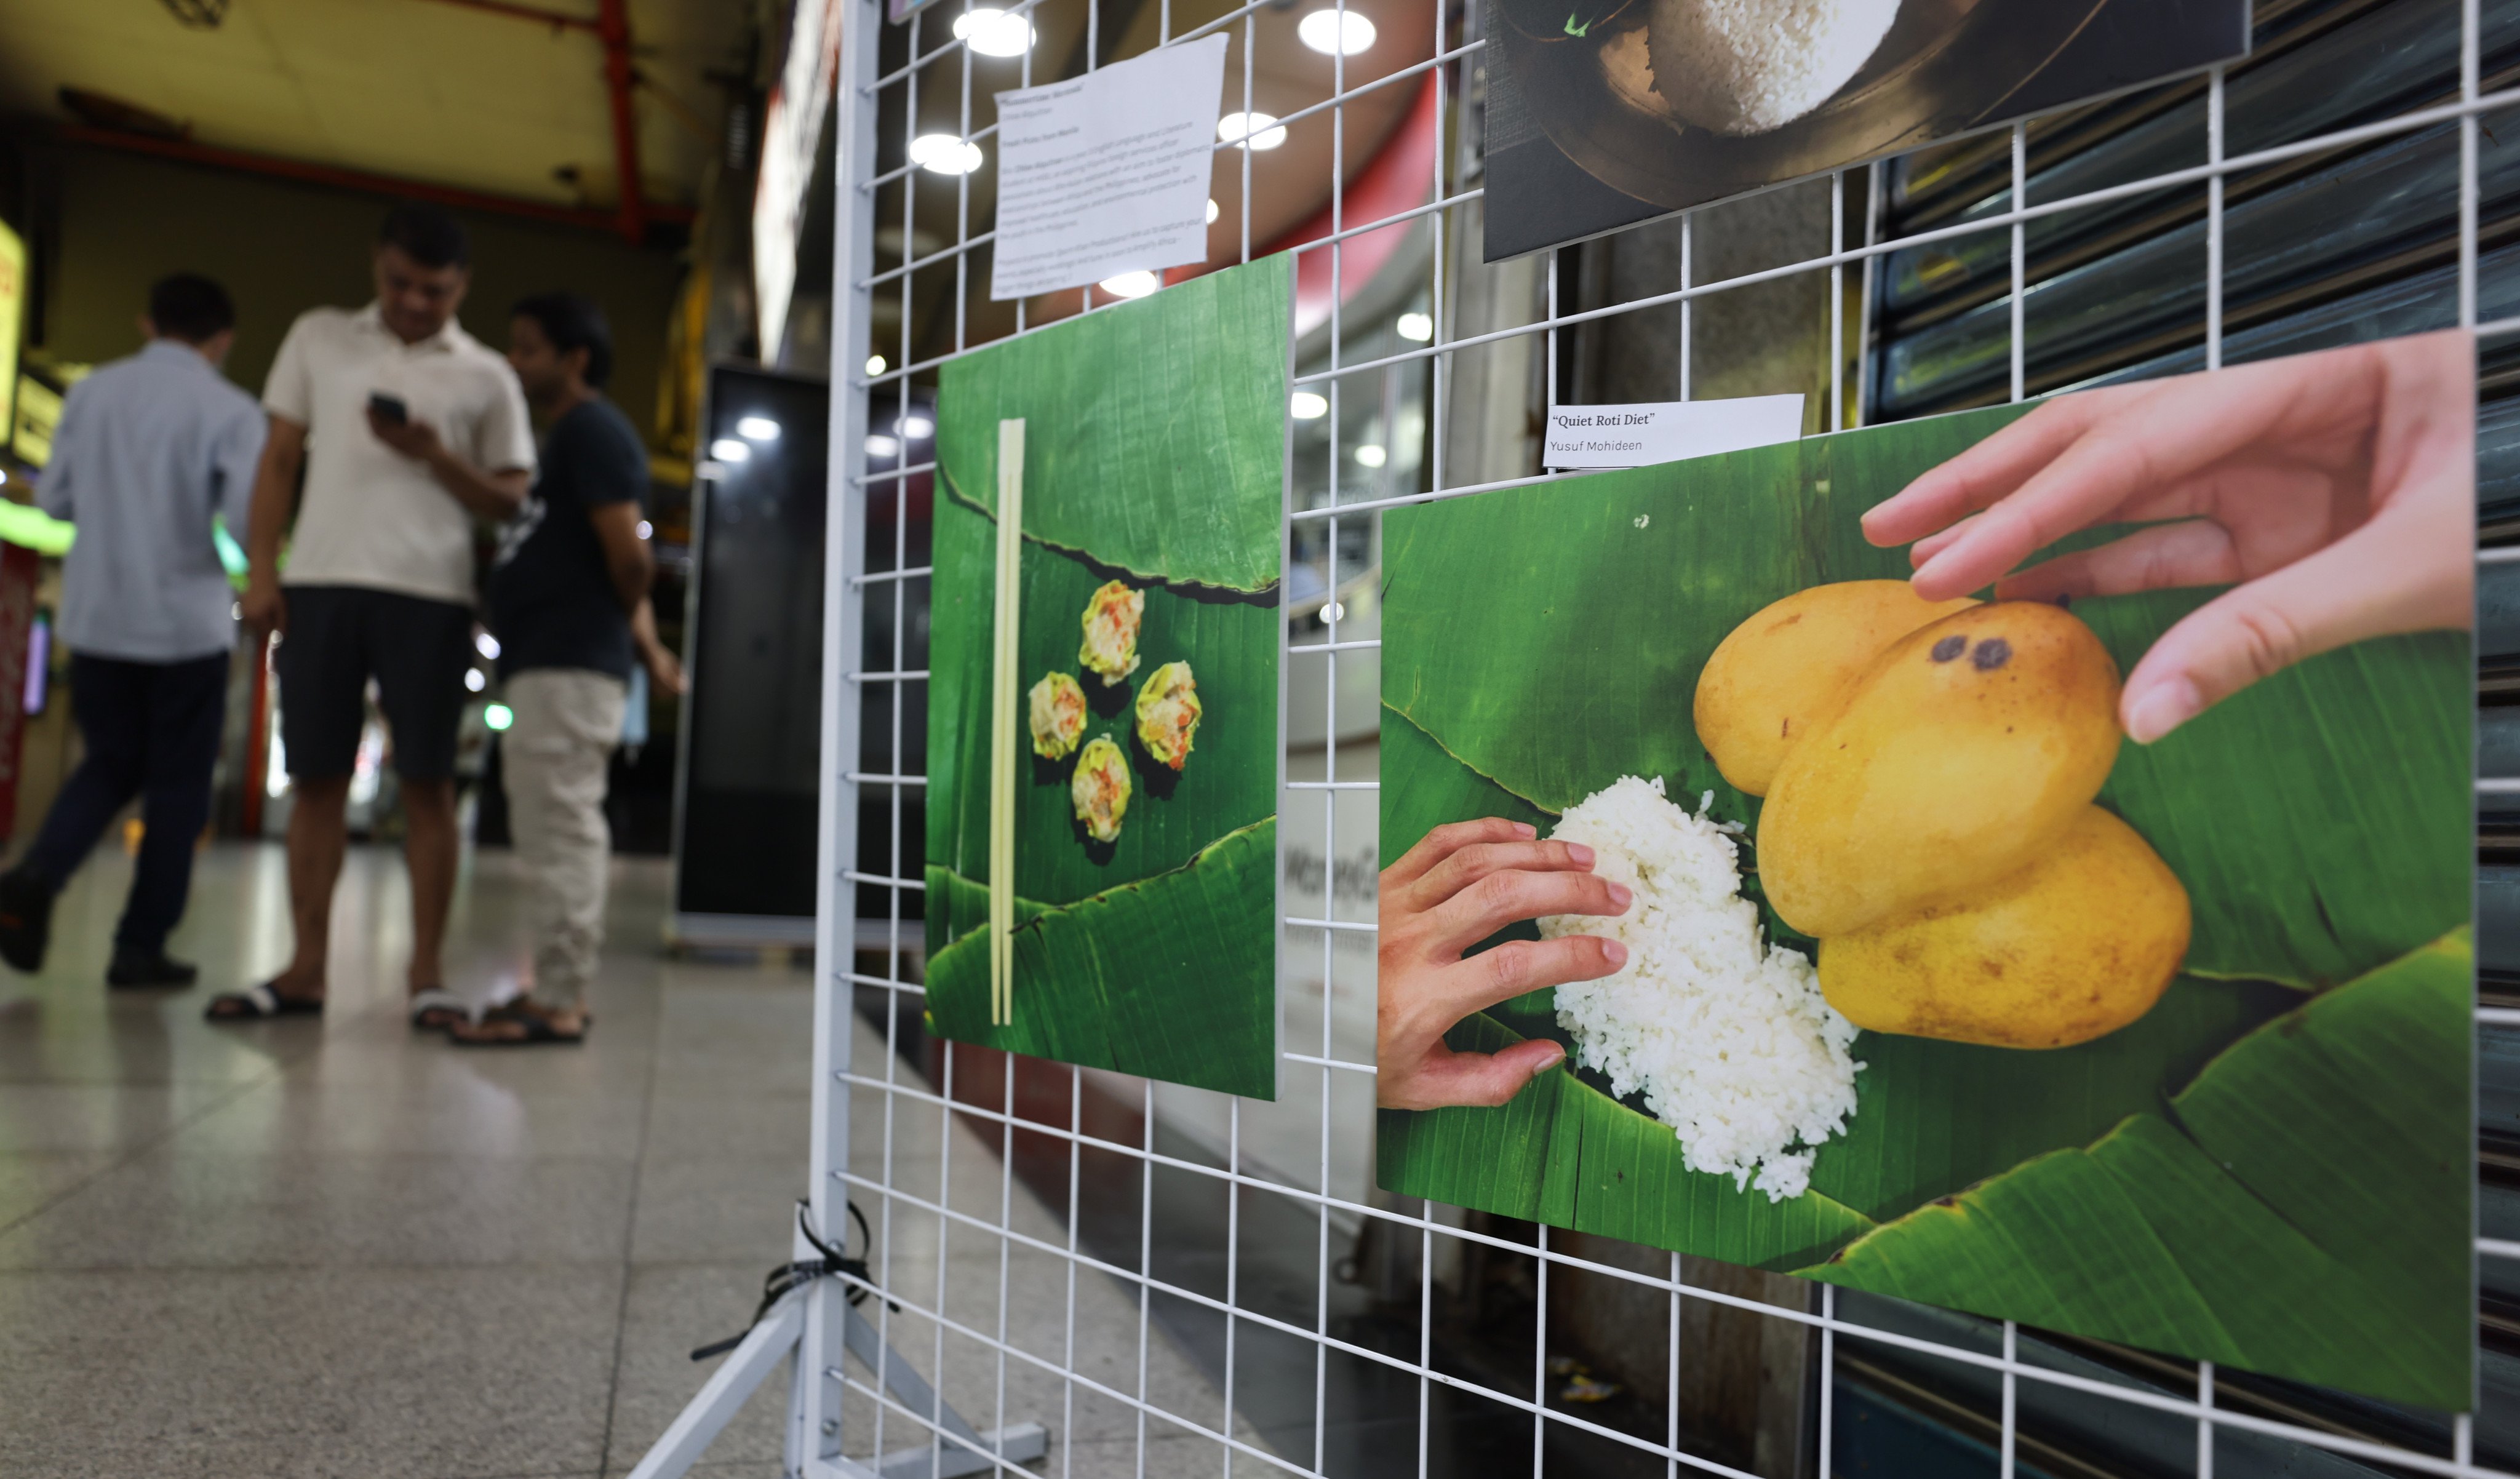 An exhibition in Chungking Mansions in Hong Kong’s Tsim Sha Tsui district explores the culinary traditions and practices of ethnic minority communities in the city, in August 2021. Photo: Nora Tam